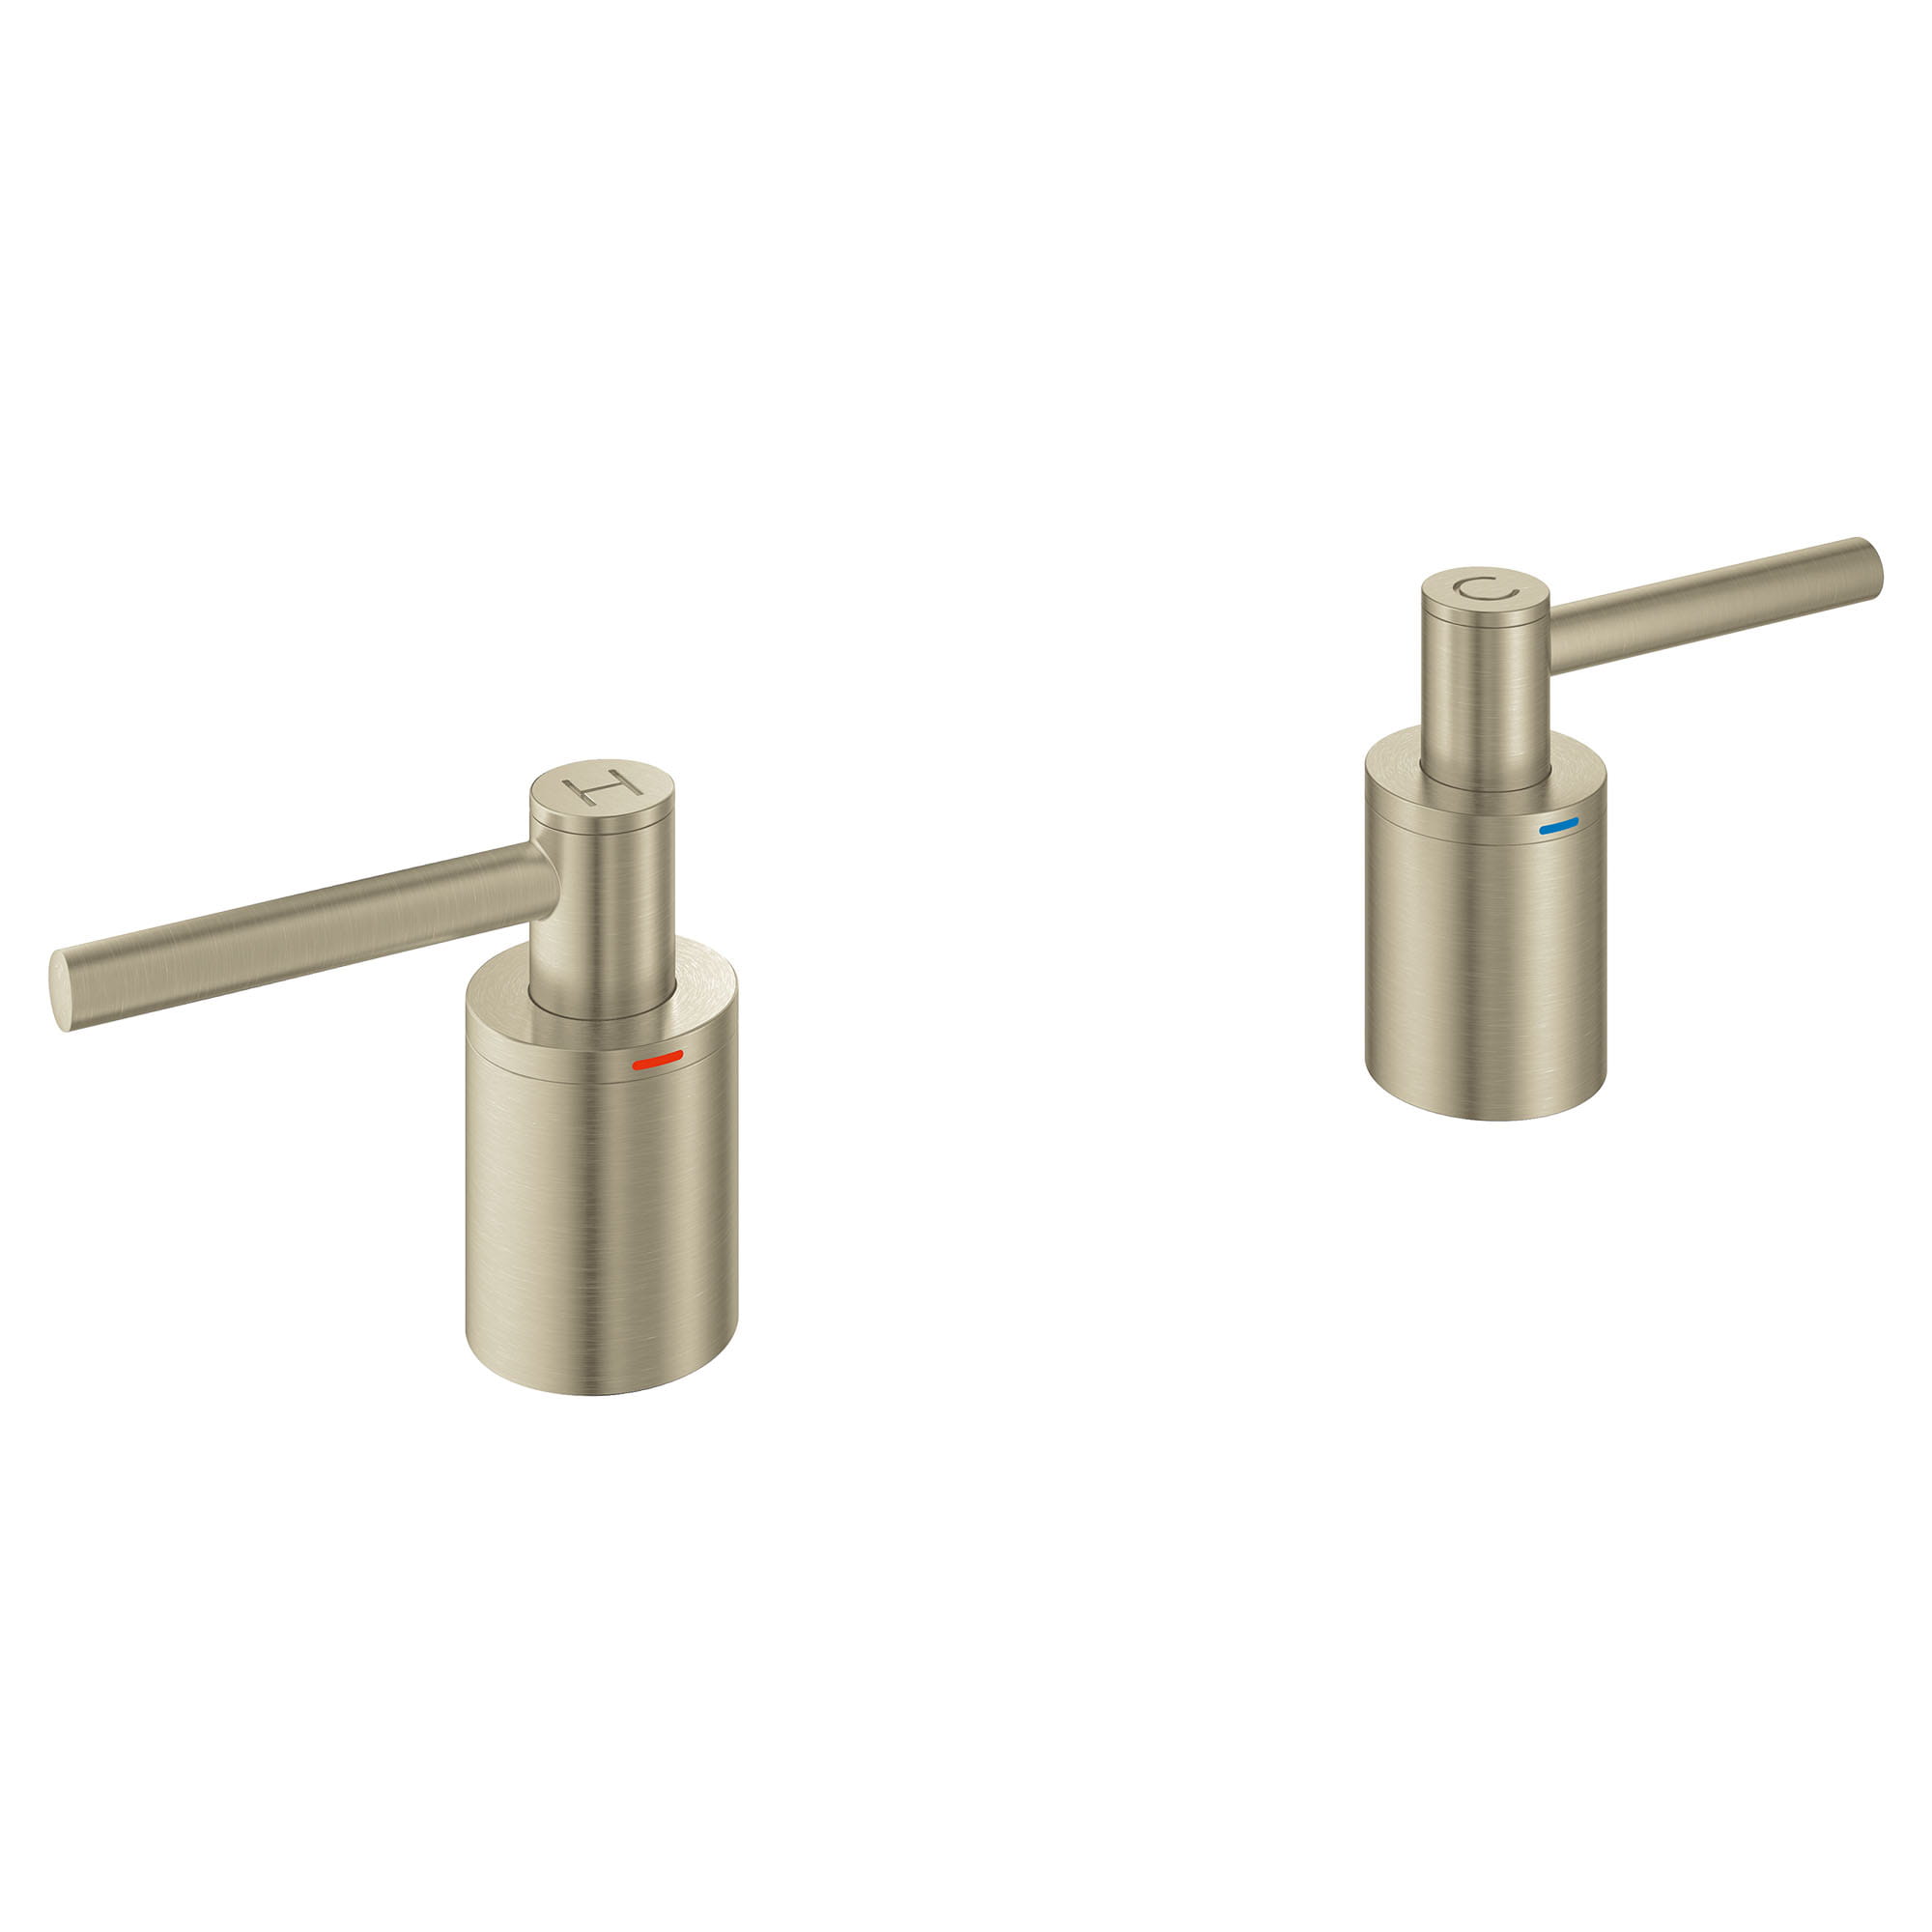 Manettes leviers la paire GROHE BRUSHED NICKEL